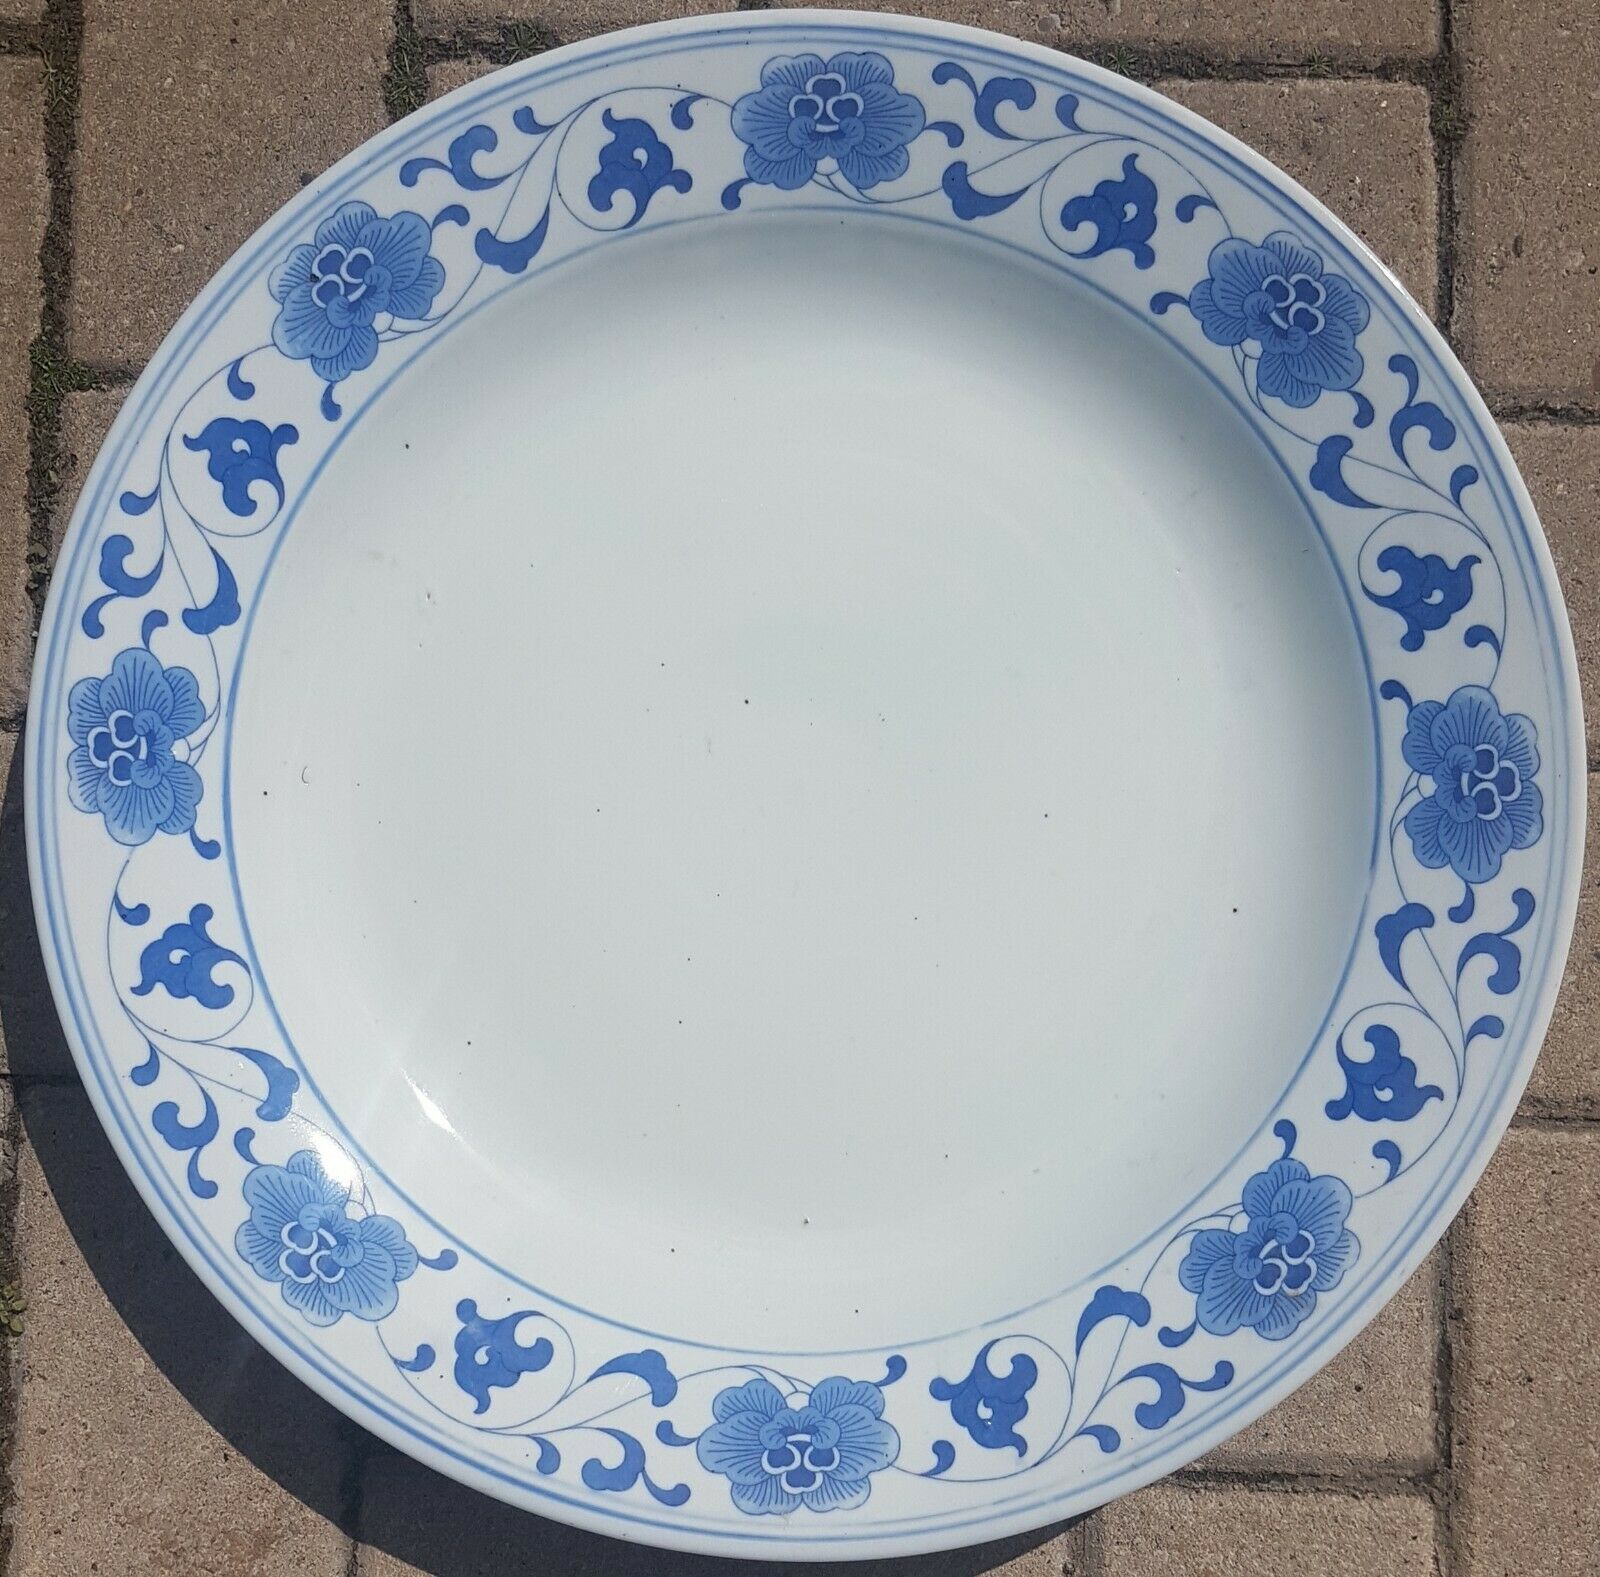 LARGE 15" ANTIQUE CHINESE BLUE & WHITE CHARGER.